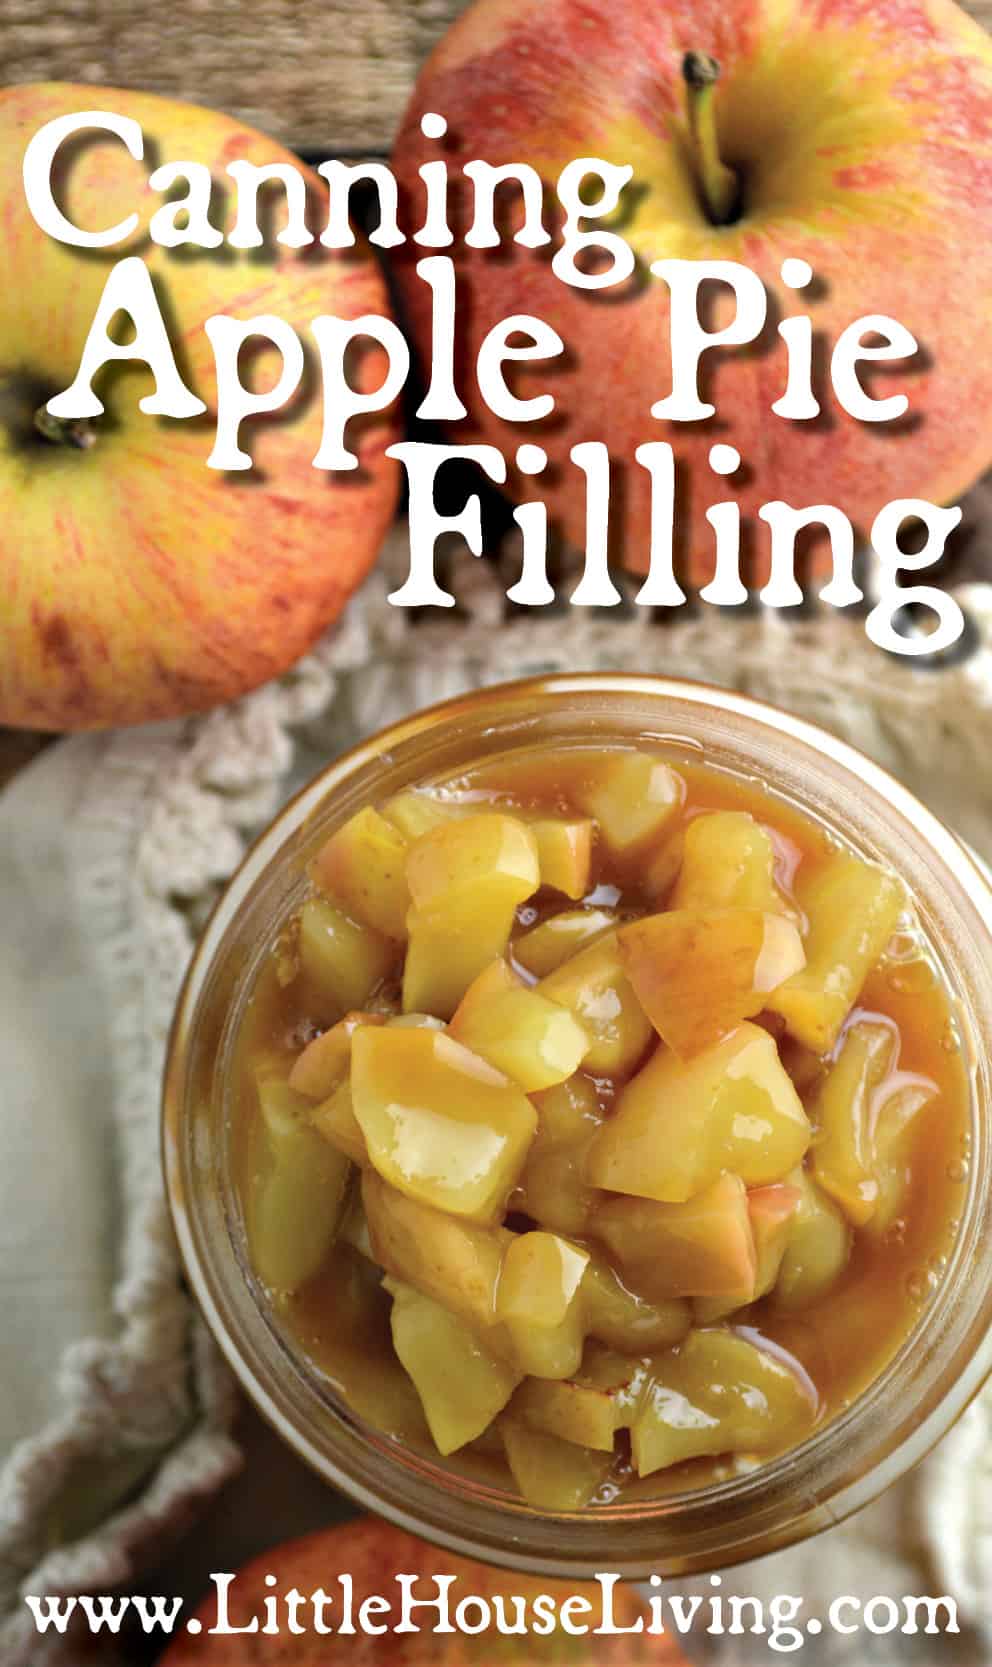 Canning Apple Pie Filling How To Make Homemade Apple Pie Filling